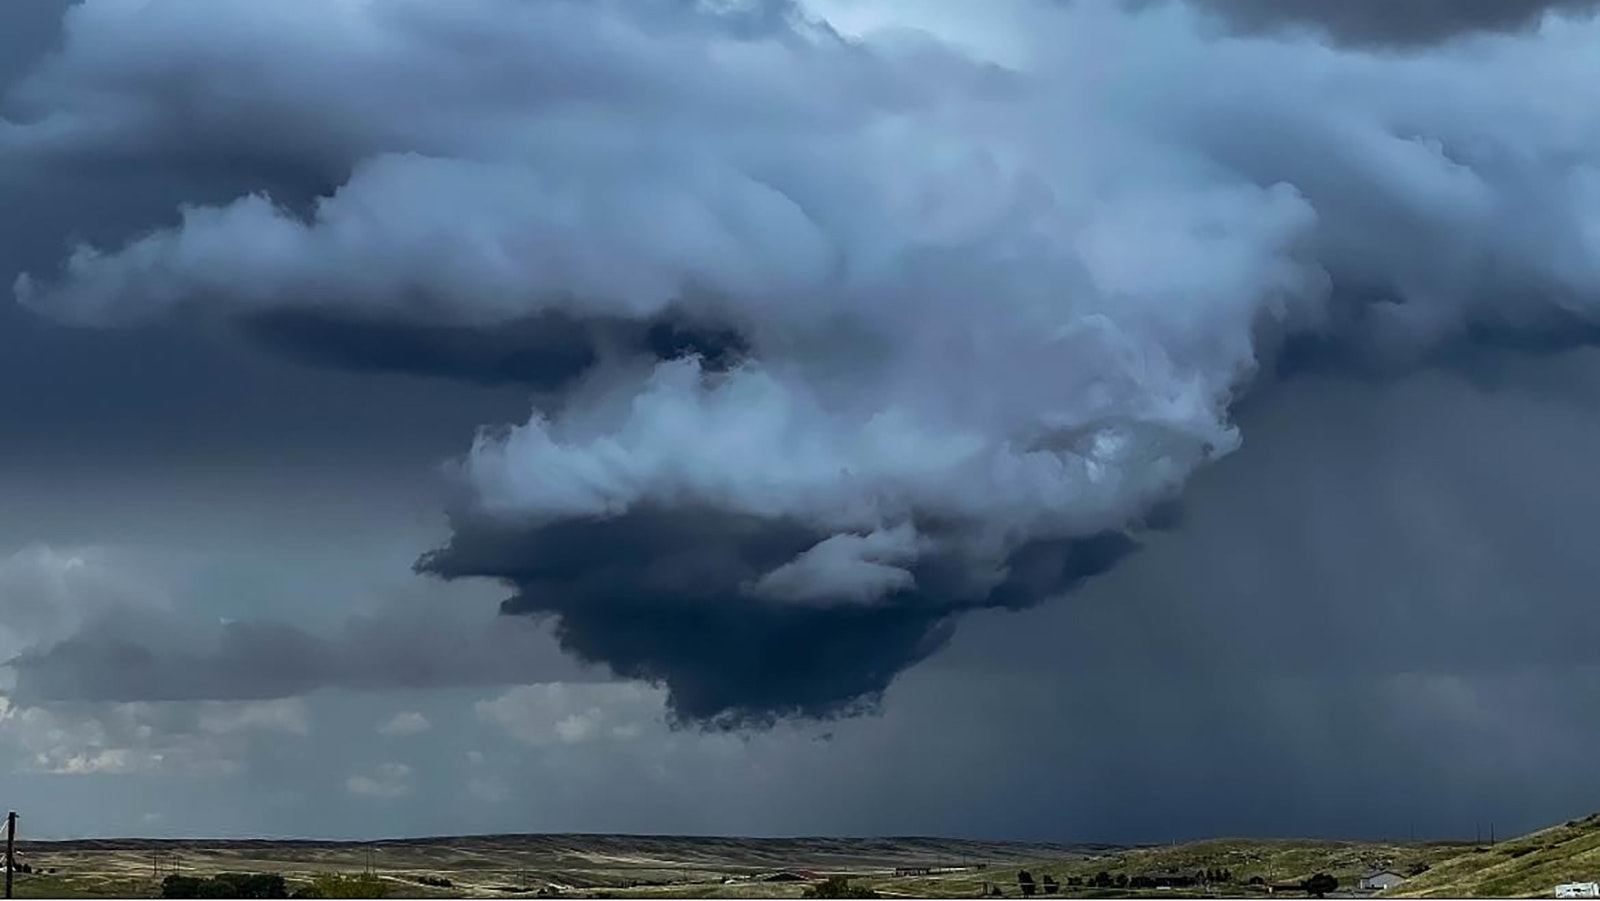 Keith Susan Wagner shared this dramatic storm hovering over Cheyenne to the Wyoming Through the Lens Facebook page Aug. 4.